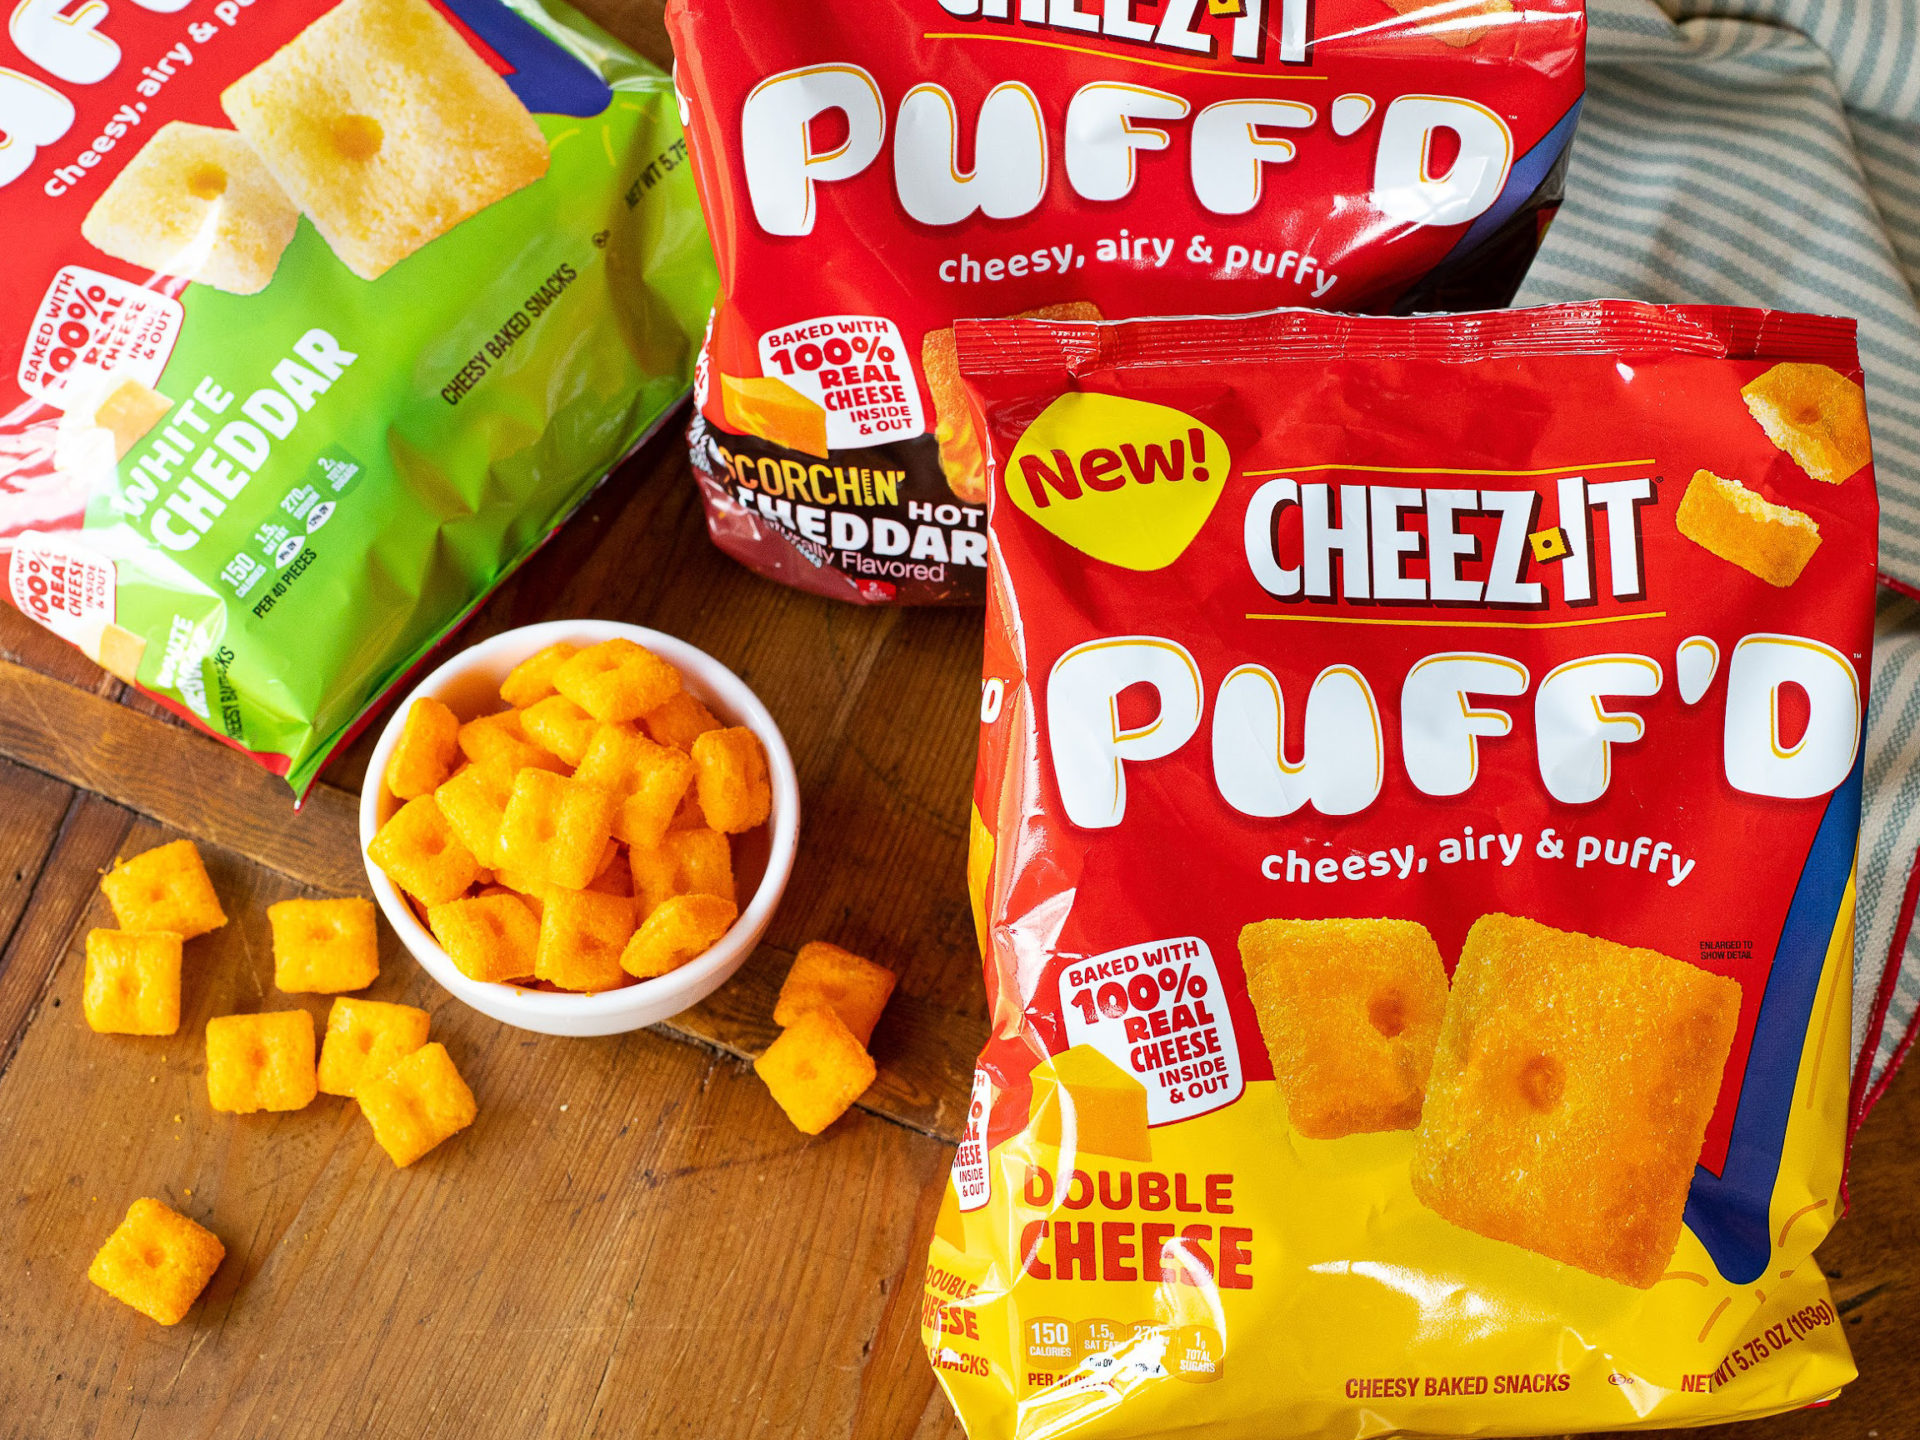 Cheez-It Family Size Puff’d Crackers As Low As $3.74 At Kroger